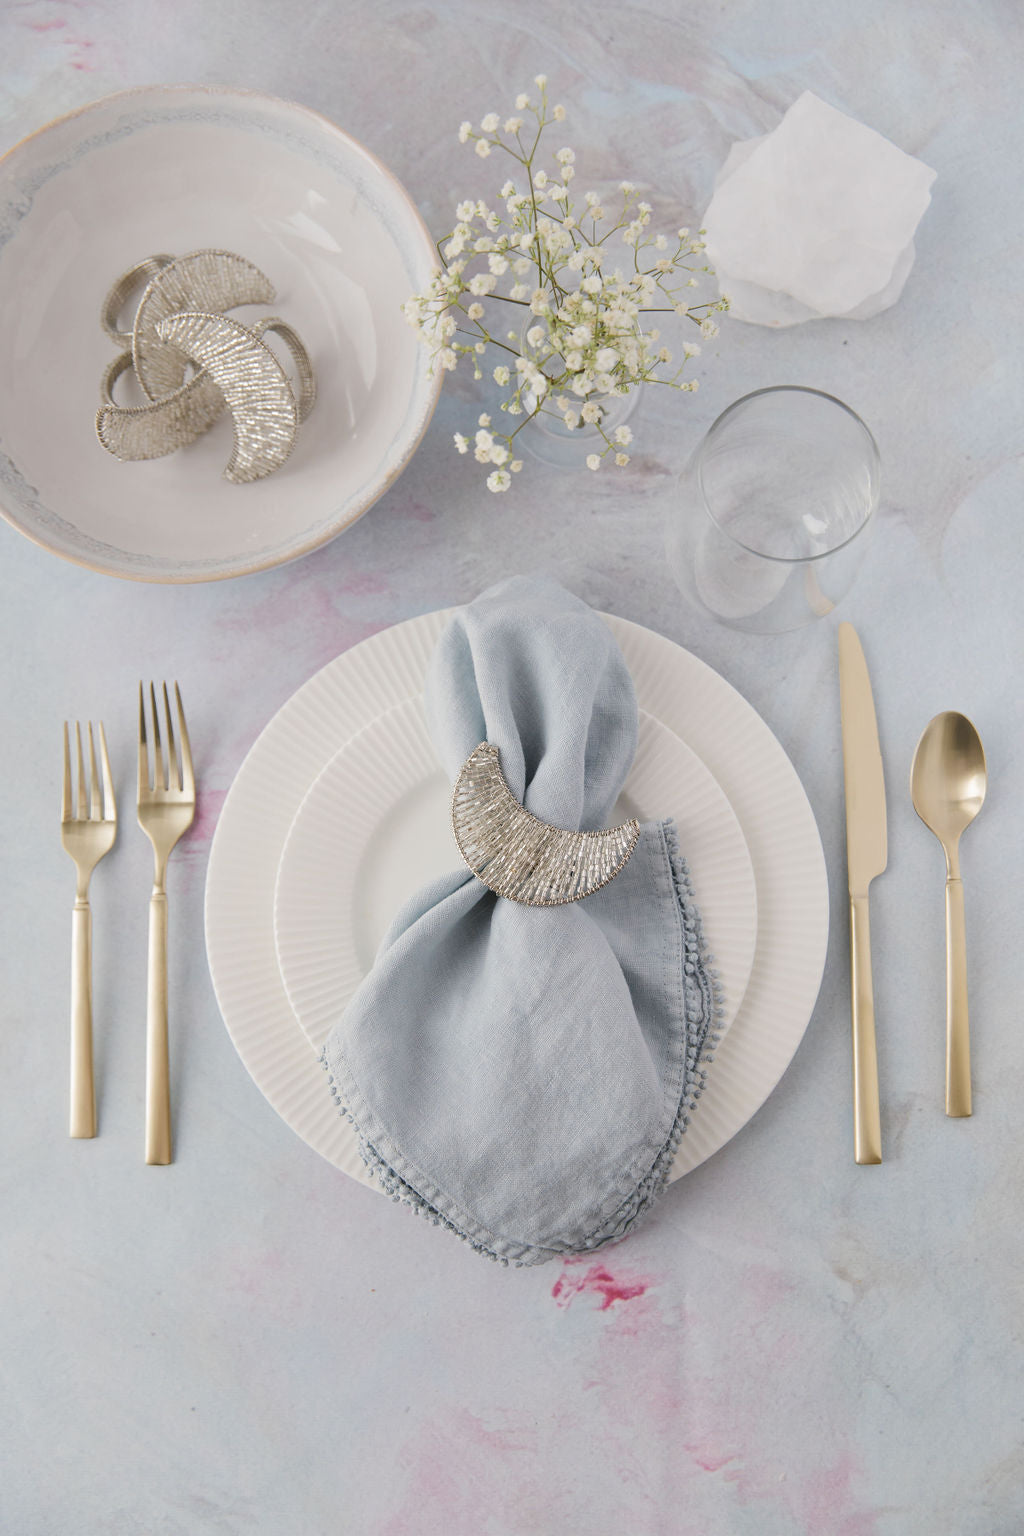 Sliver Beaded Moon Napkin Ring with napkin on dinner table set